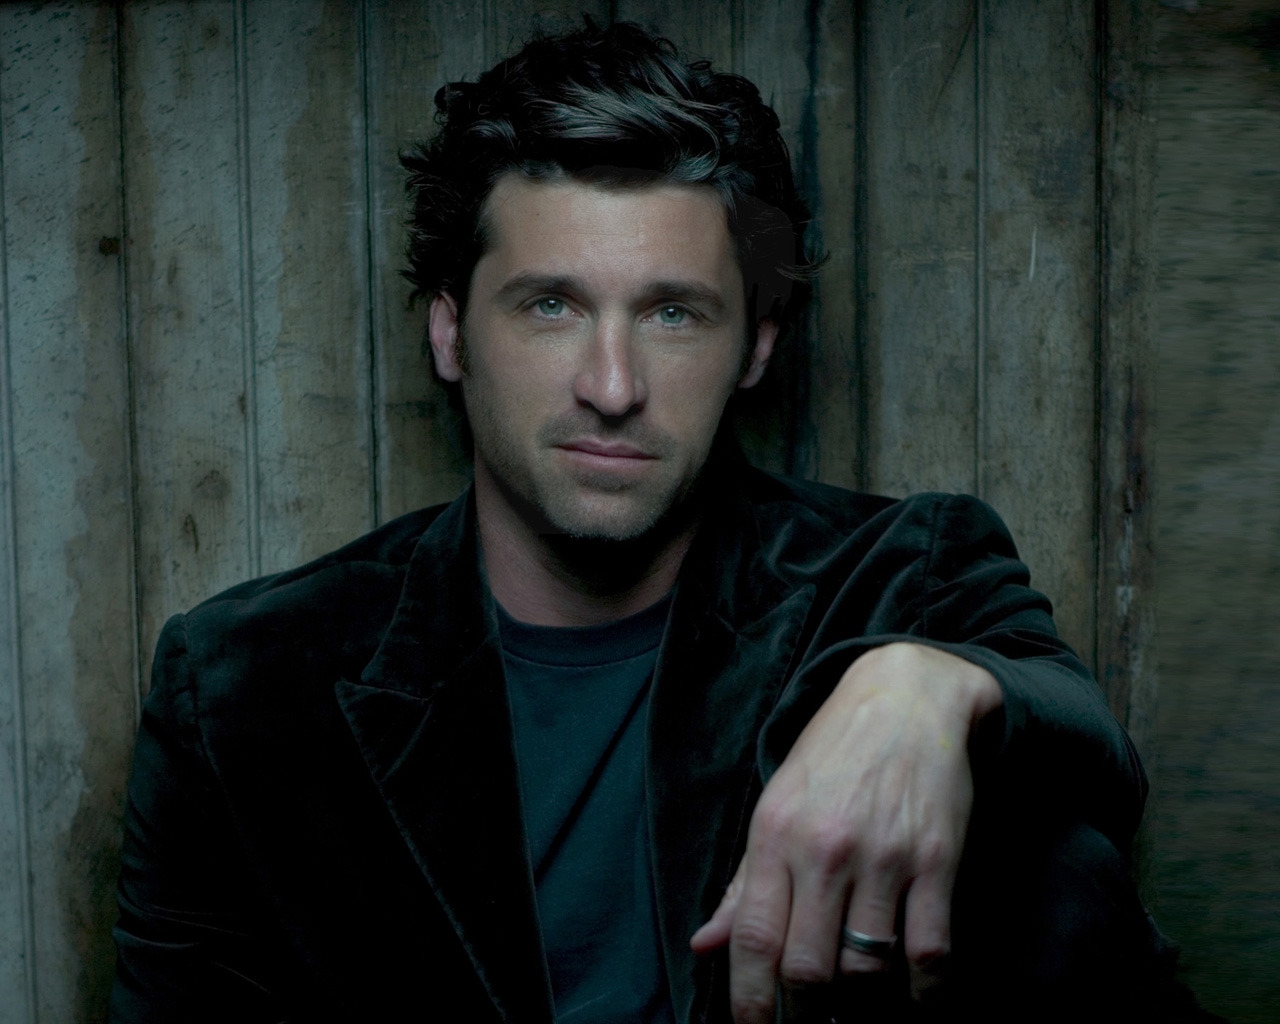 Patrick Dempsey Look for 1280 x 1024 resolution